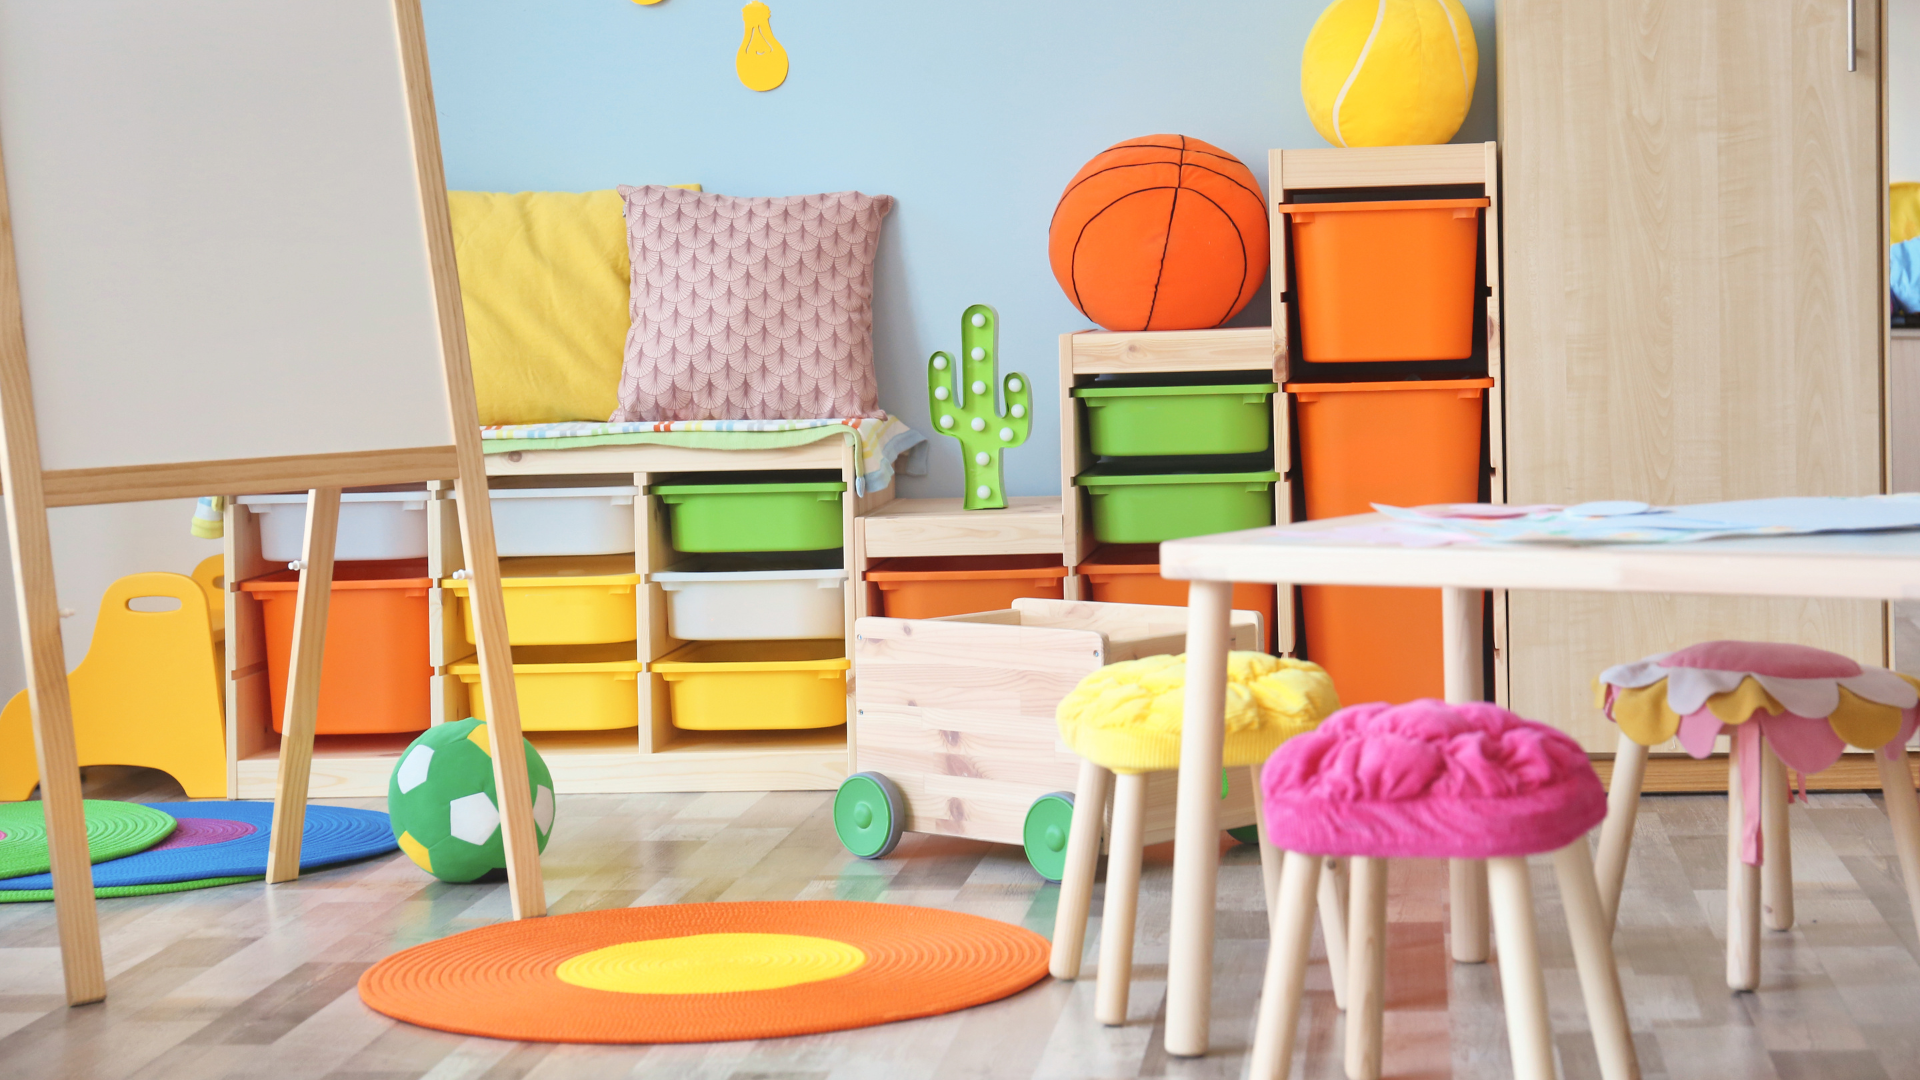 Colorful Ideas for Decorating Your Child’s Bedroom